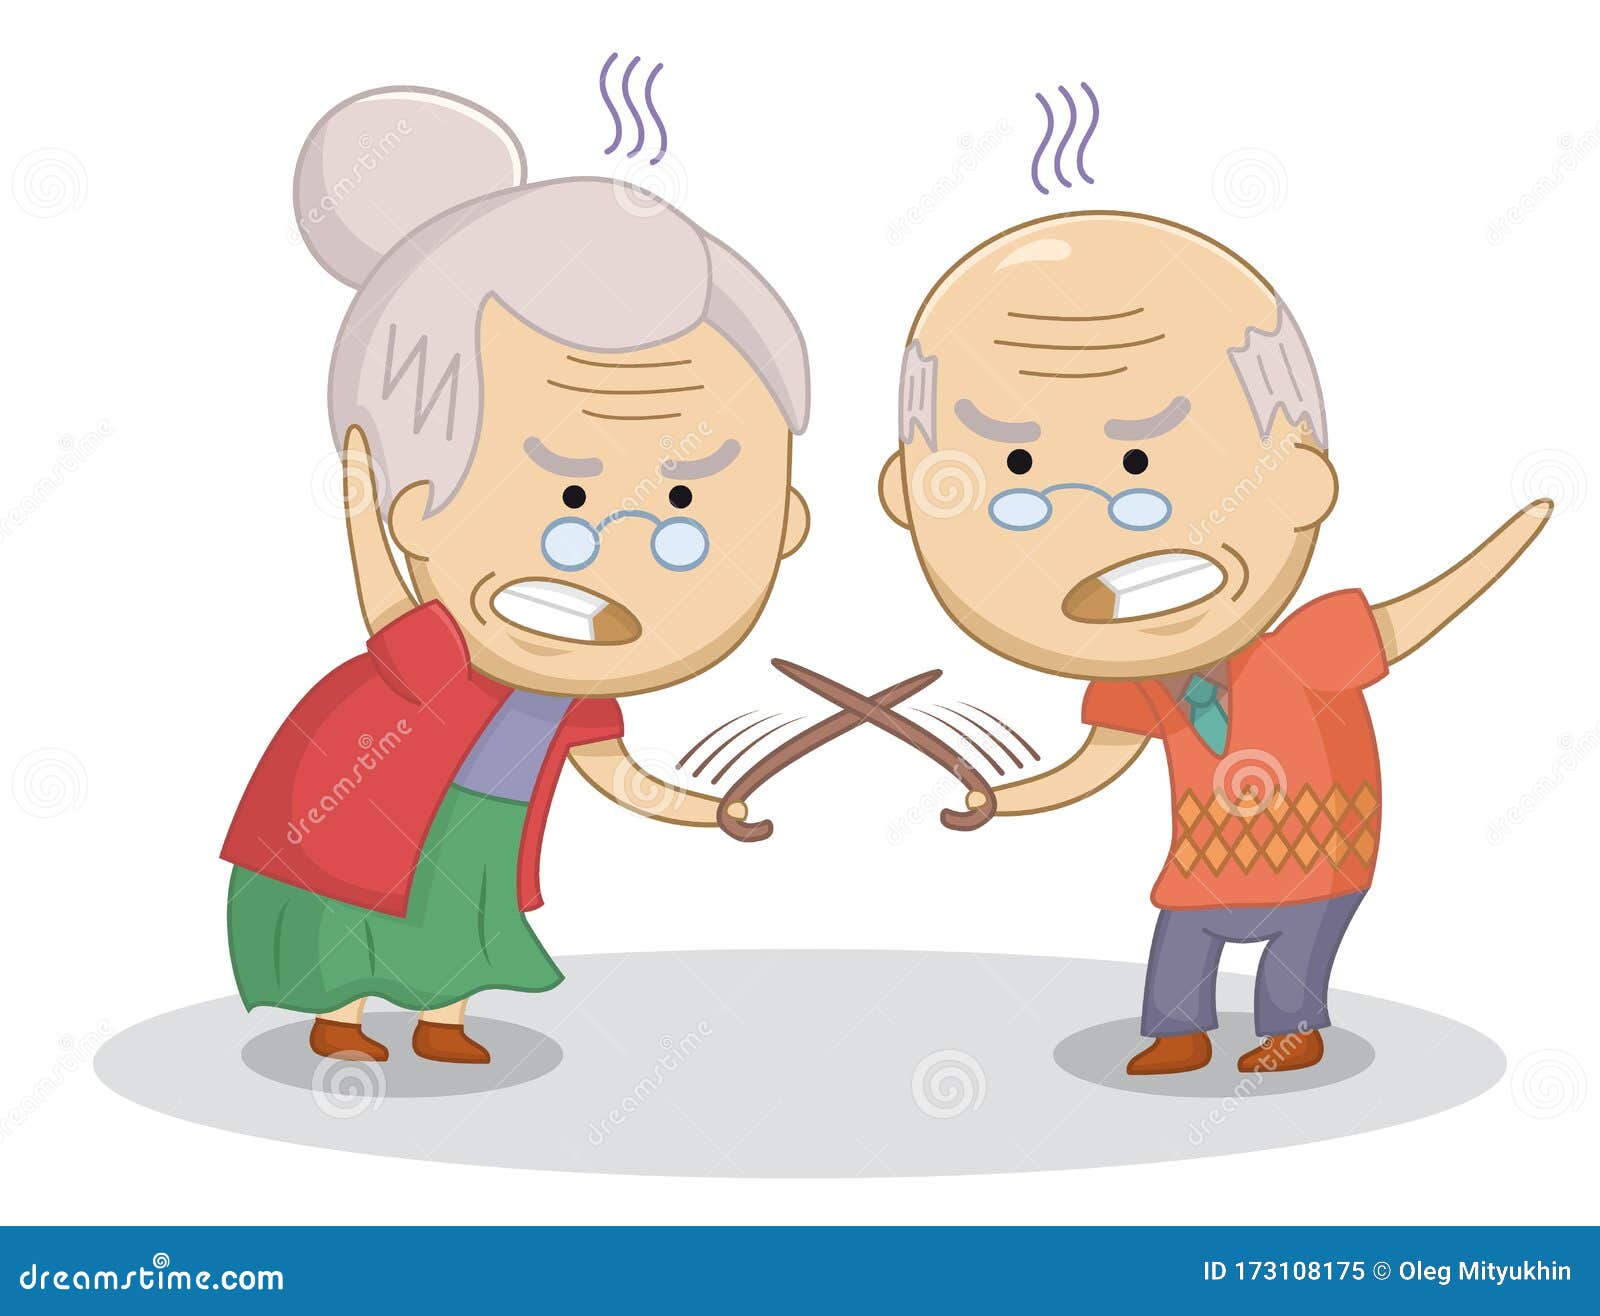 Funny Cartoon Elderly Couple Duel with Canes. an Elderly Married Couple   Relationship Concept Stock Vector - Illustration of character,  funny: 173108175